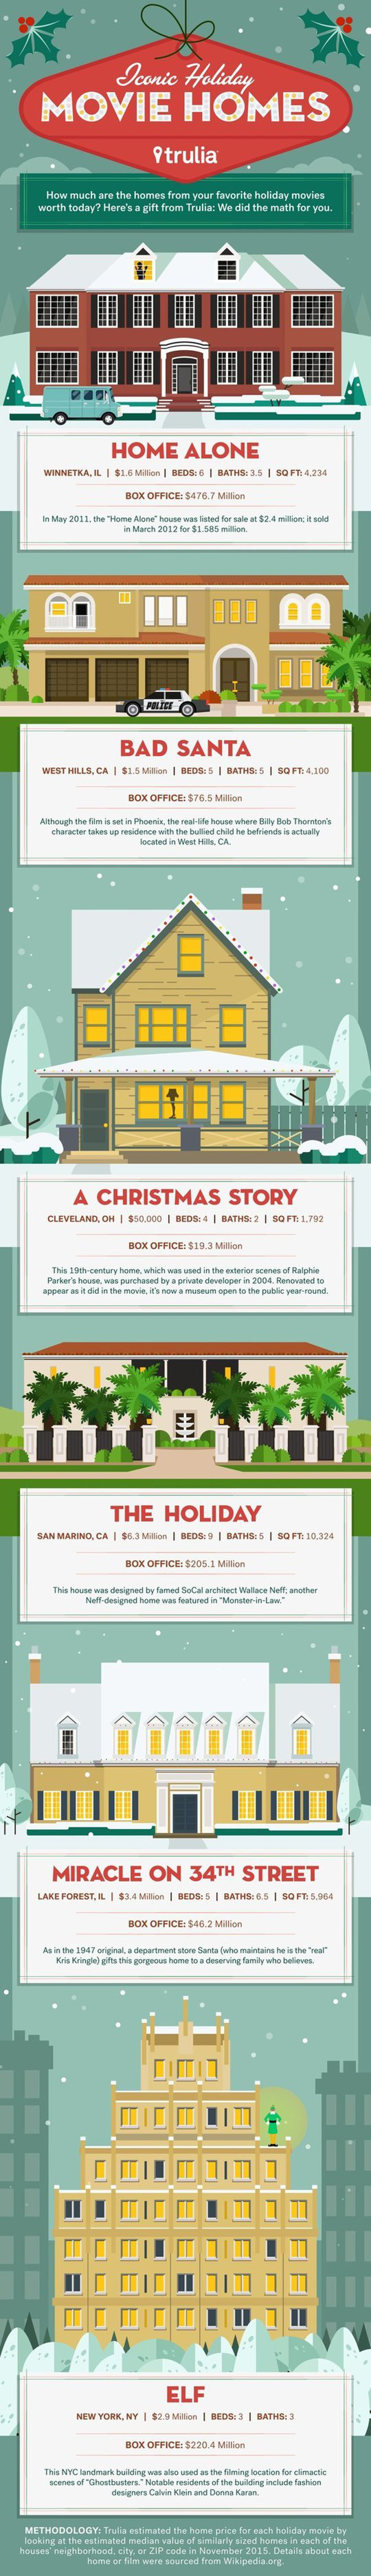 Iconic-Holiday-Movie-Homes-11-23-Infographic[2]